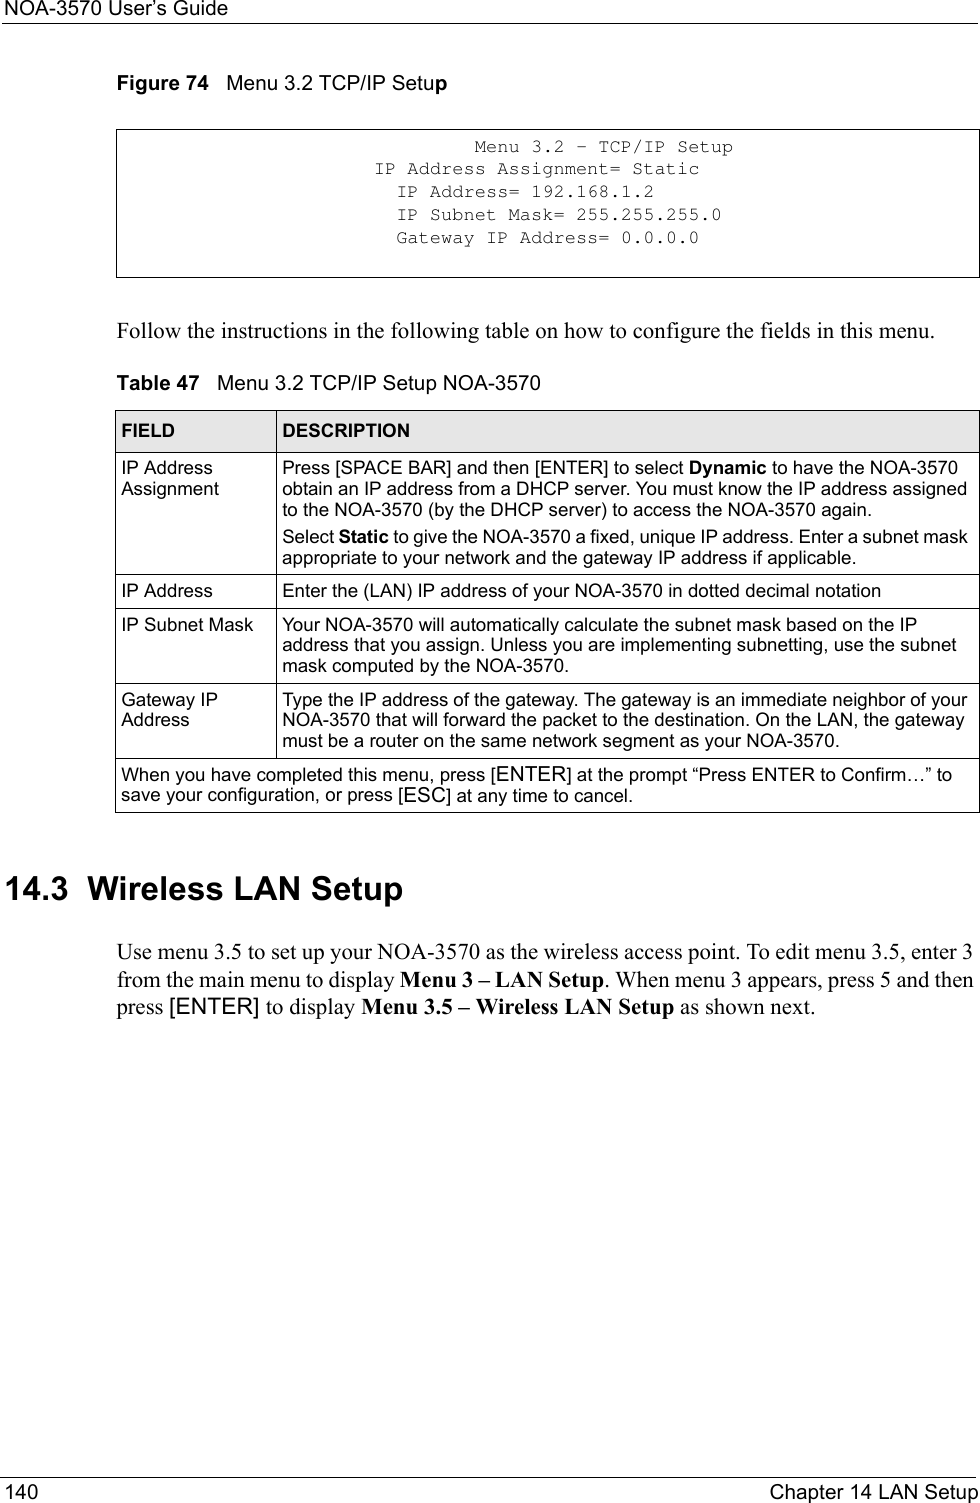 NOA-3570 User’s Guide140 Chapter 14 LAN SetupFigure 74   Menu 3.2 TCP/IP SetupFollow the instructions in the following table on how to configure the fields in this menu.14.3  Wireless LAN SetupUse menu 3.5 to set up your NOA-3570 as the wireless access point. To edit menu 3.5, enter 3 from the main menu to display Menu 3 – LAN Setup. When menu 3 appears, press 5 and then press [ENTER] to display Menu 3.5 – Wireless LAN Setup as shown next.                   Menu 3.2 - TCP/IP Setup         IP Address Assignment= Static           IP Address= 192.168.1.2           IP Subnet Mask= 255.255.255.0           Gateway IP Address= 0.0.0.0Table 47   Menu 3.2 TCP/IP Setup NOA-3570FIELD DESCRIPTIONIP Address AssignmentPress [SPACE BAR] and then [ENTER] to select Dynamic to have the NOA-3570 obtain an IP address from a DHCP server. You must know the IP address assigned to the NOA-3570 (by the DHCP server) to access the NOA-3570 again. Select Static to give the NOA-3570 a fixed, unique IP address. Enter a subnet mask appropriate to your network and the gateway IP address if applicable.IP Address Enter the (LAN) IP address of your NOA-3570 in dotted decimal notationIP Subnet Mask Your NOA-3570 will automatically calculate the subnet mask based on the IP address that you assign. Unless you are implementing subnetting, use the subnet mask computed by the NOA-3570.Gateway IP AddressType the IP address of the gateway. The gateway is an immediate neighbor of your NOA-3570 that will forward the packet to the destination. On the LAN, the gateway must be a router on the same network segment as your NOA-3570.When you have completed this menu, press [ENTER] at the prompt “Press ENTER to Confirm…” to save your configuration, or press [ESC] at any time to cancel.